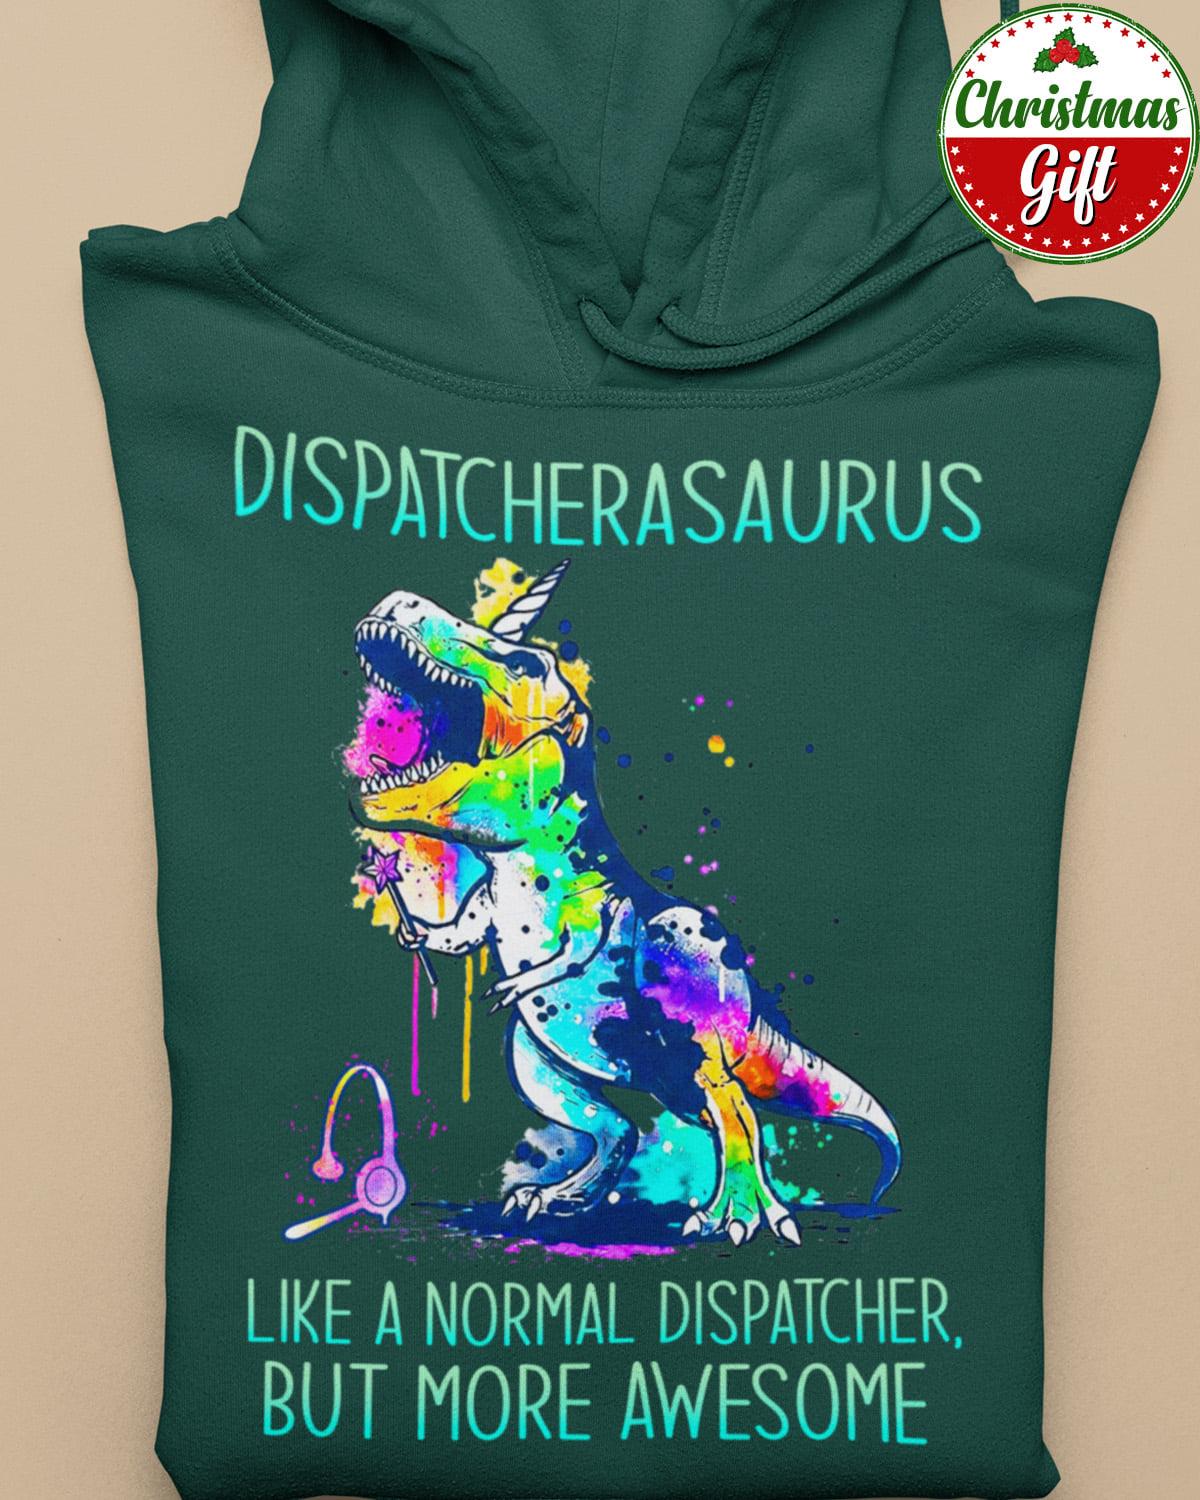 Dispatcherasaurus like a normal dispatcher, but more awesome - Colorful dinosaur